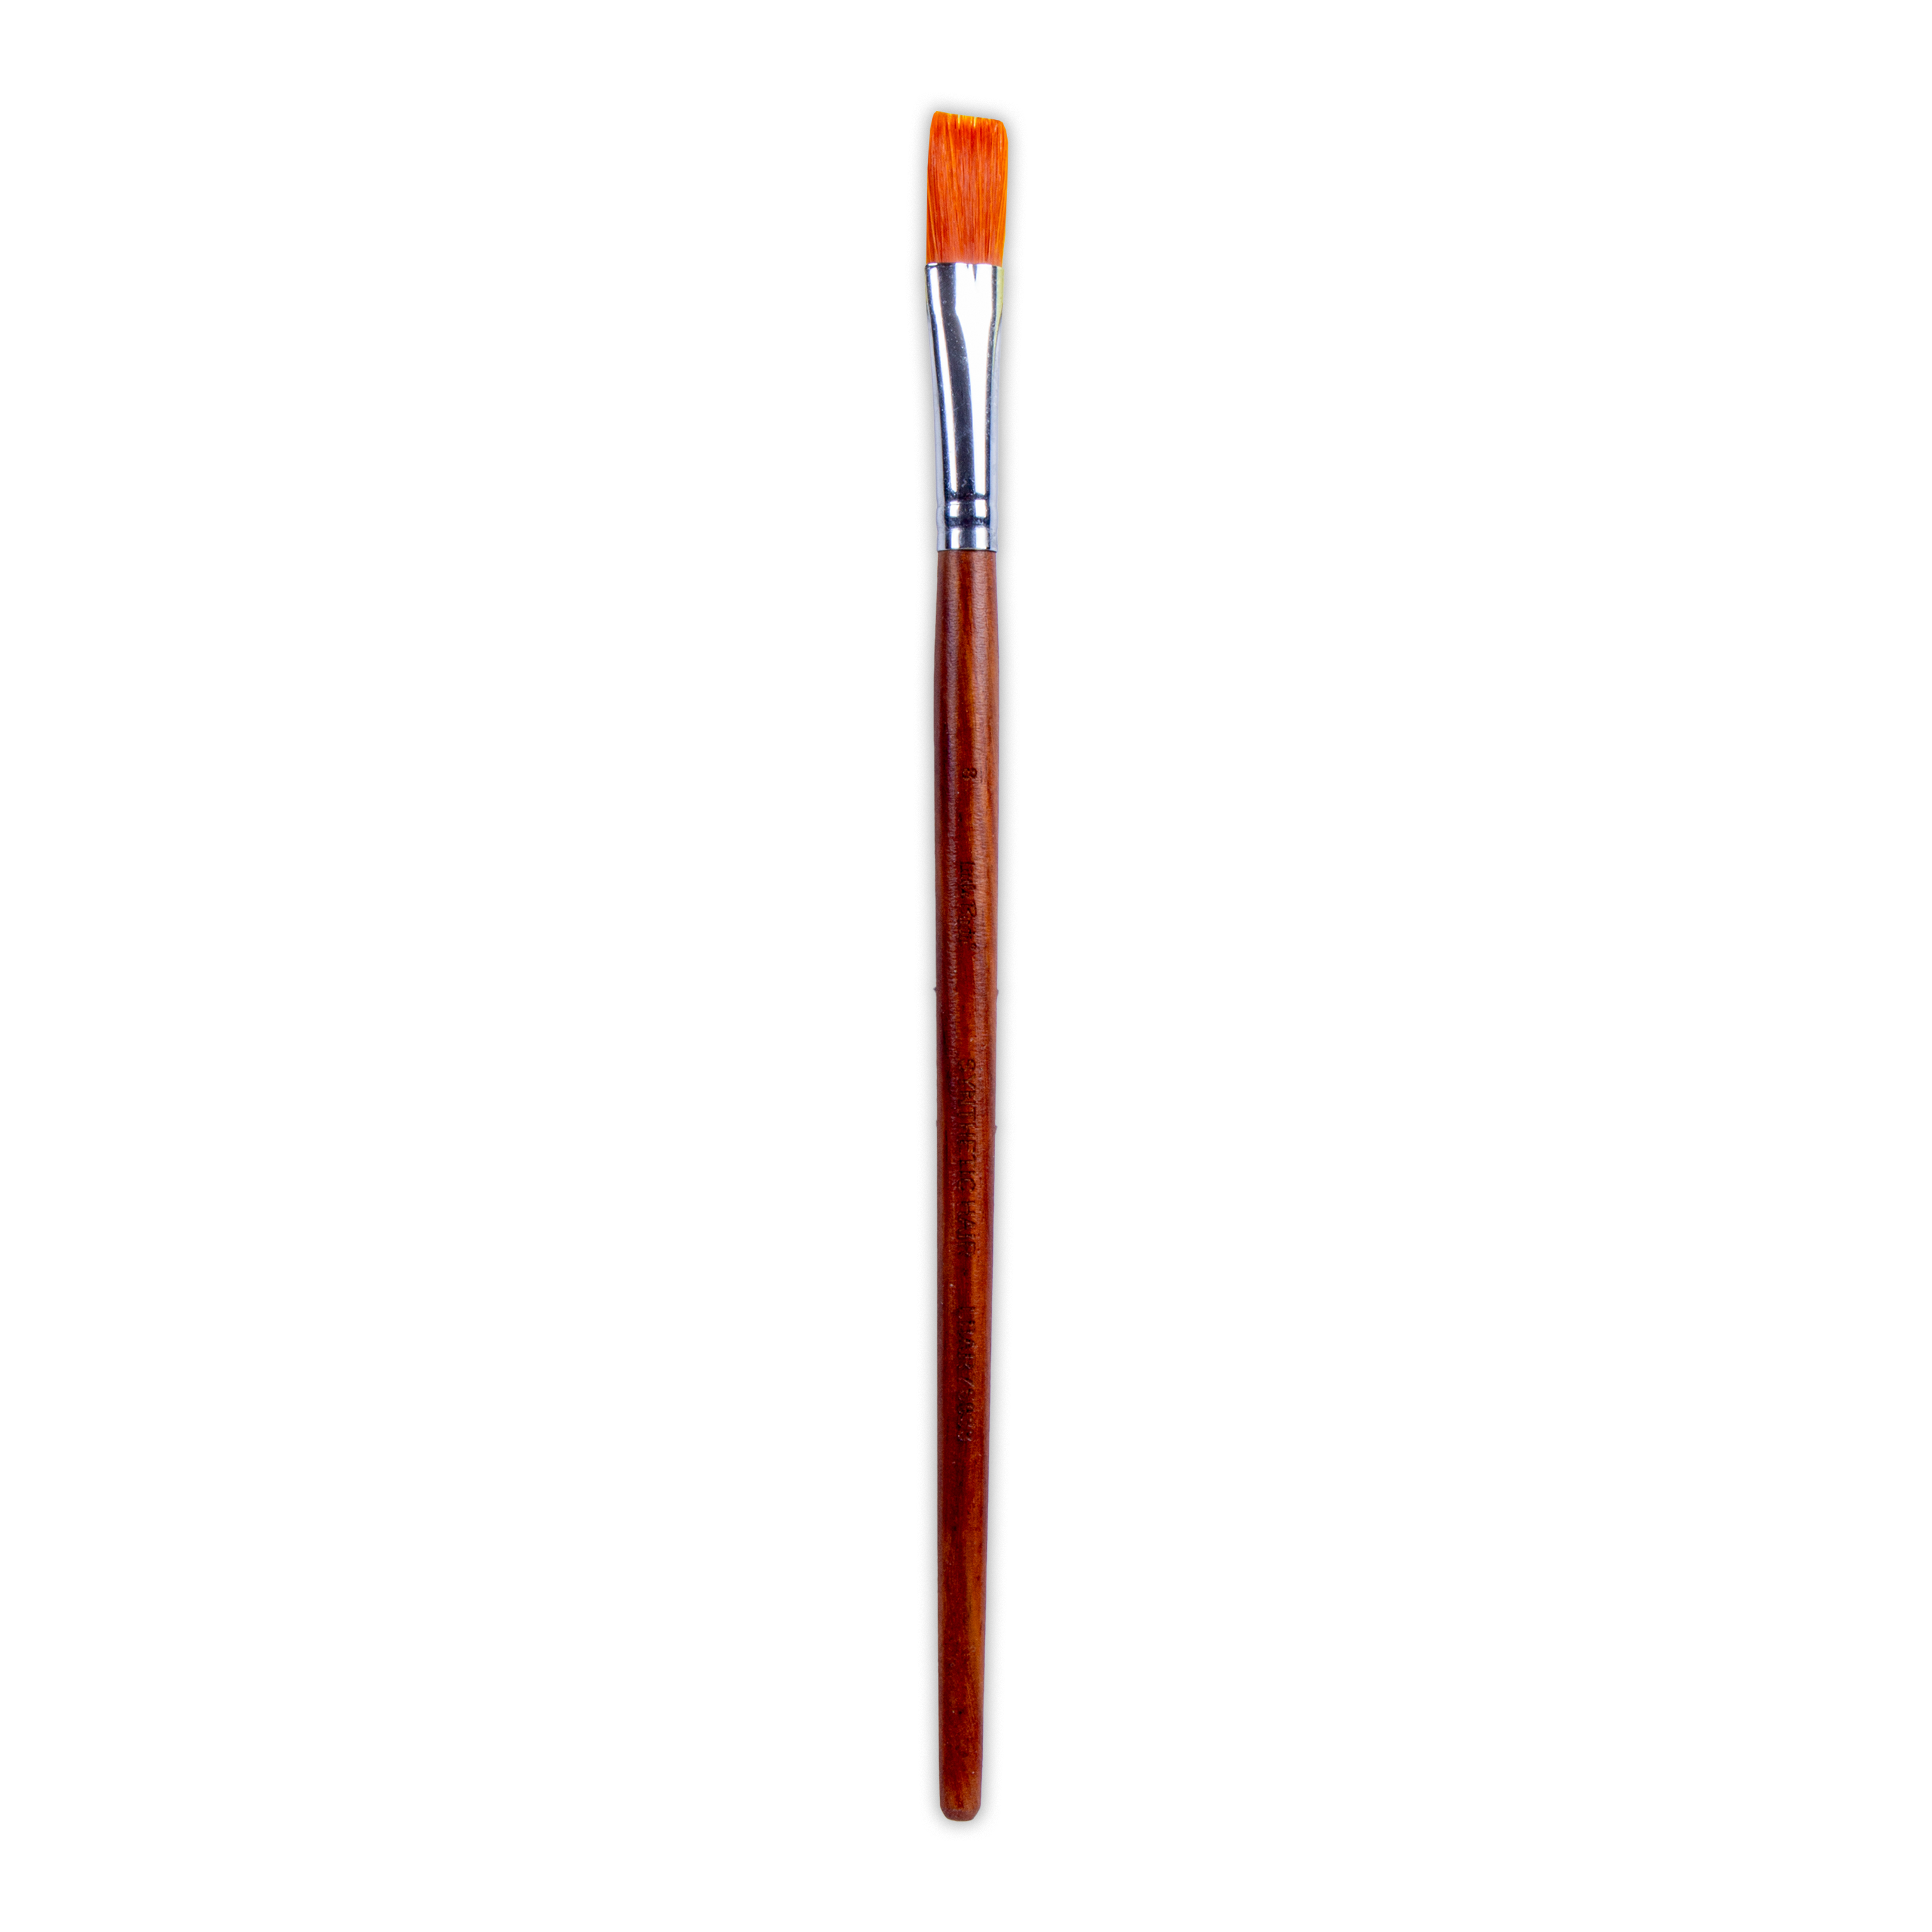 Rosewood Flat Brush Synthetic Hair Handle Length 200mm Size 8 1 pc